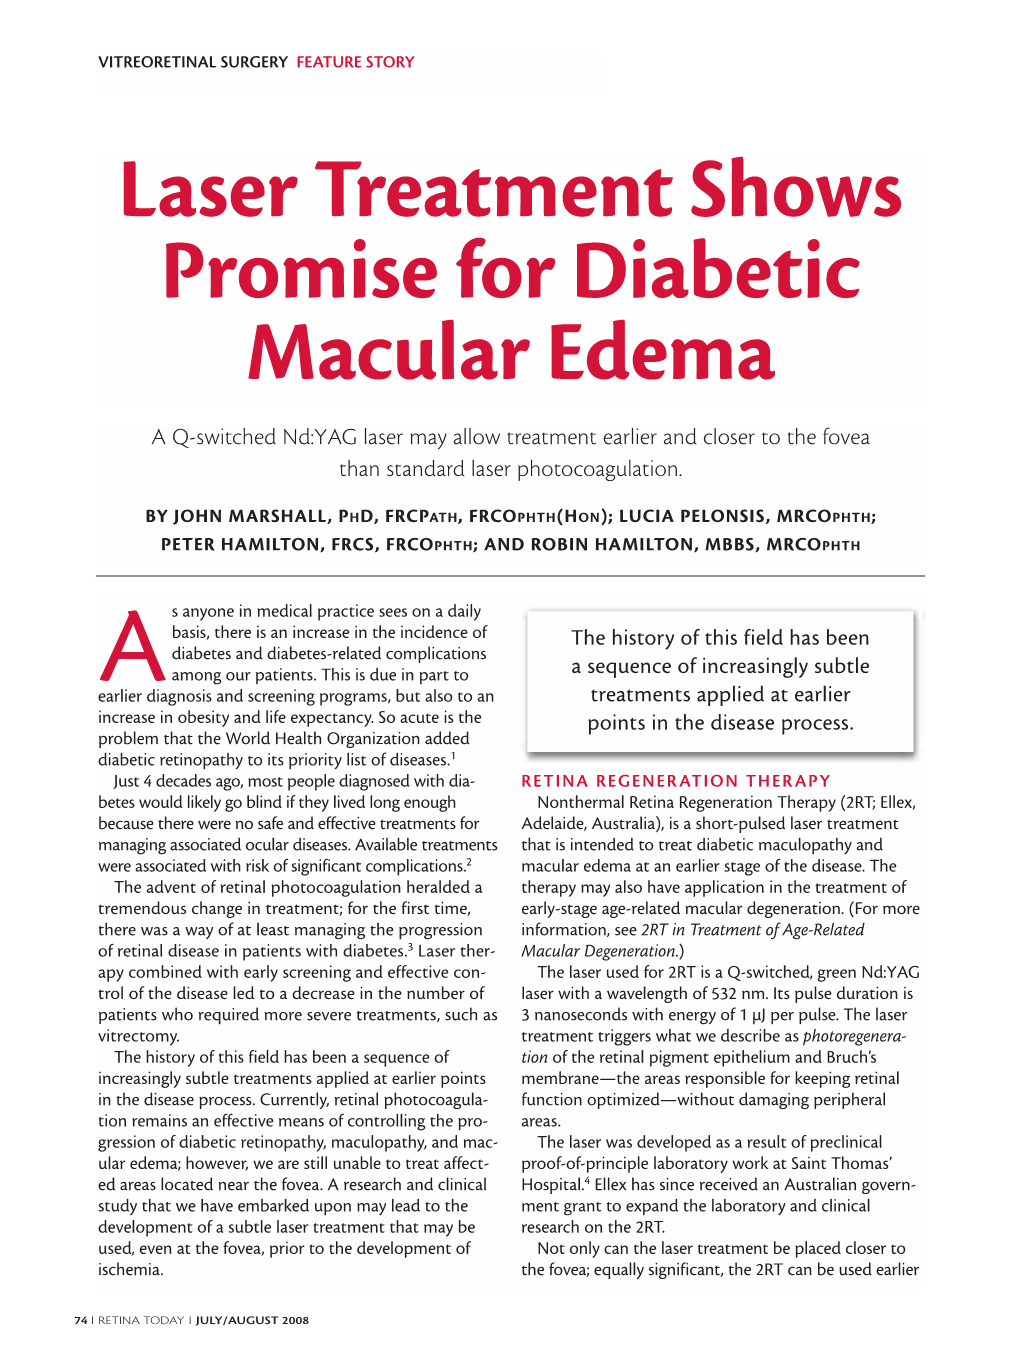 Laser Treatment Shows Promise for Diabetic Macular Edema